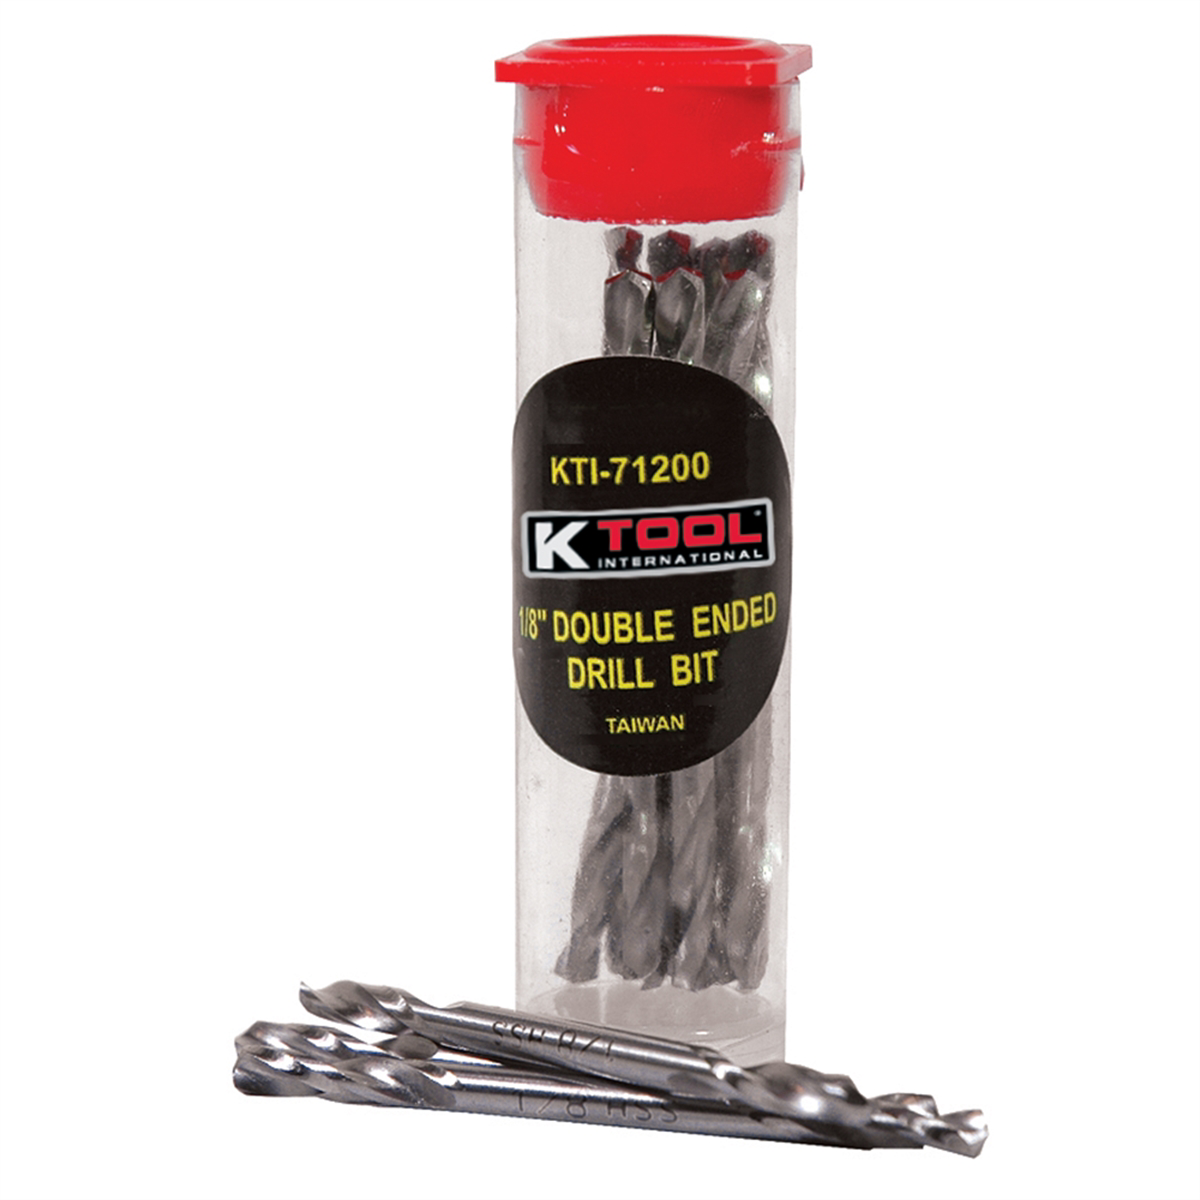 K Tool 71200 Double End Drill Bits - 1/8 In - 10 Pack